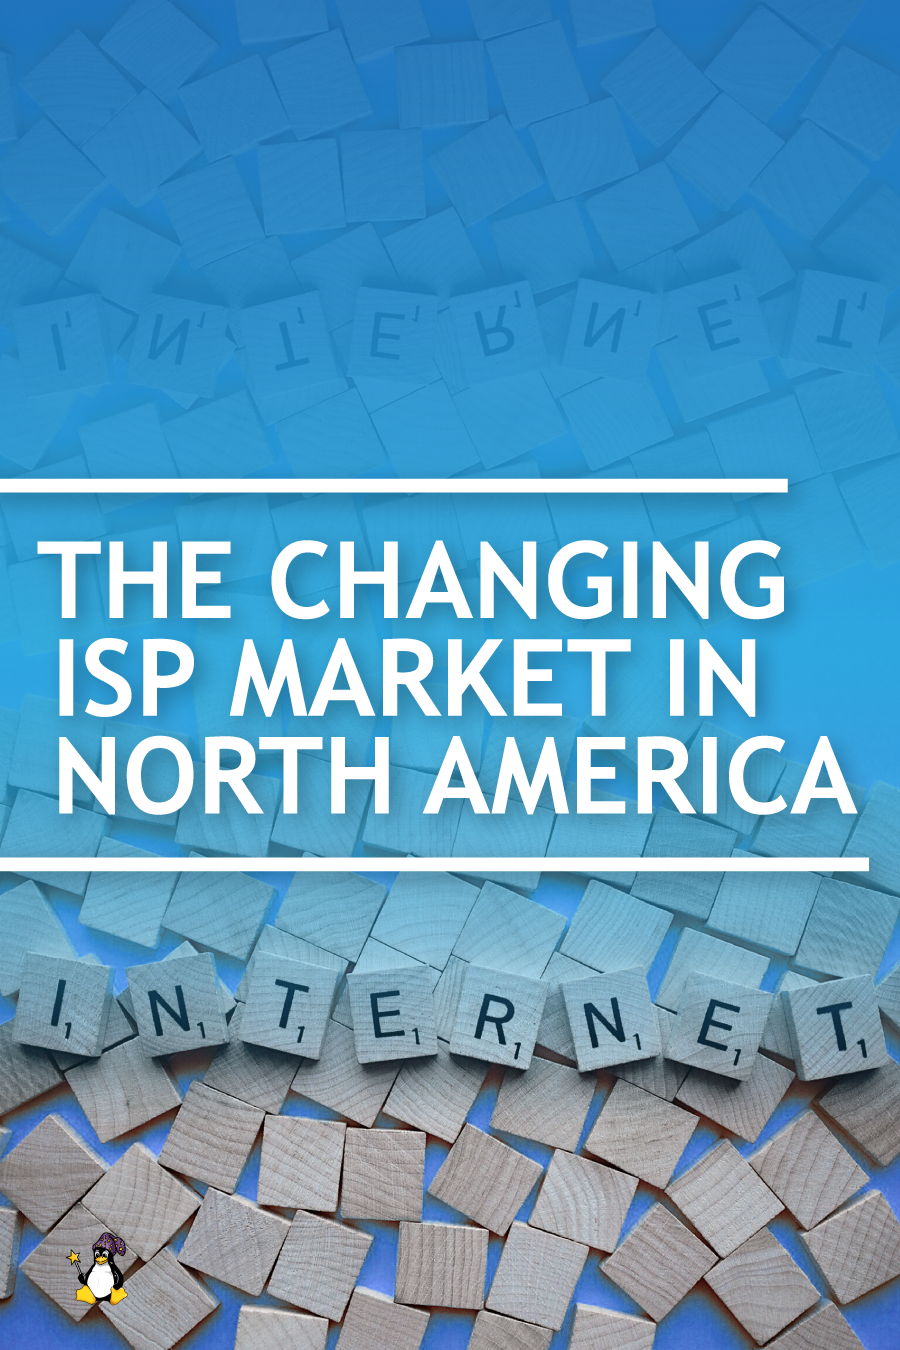 Times have really changed since the dial up days of the 1990's. The ISP Market is shifting faster than we can keep up with; so let's take a look at this changing landscape.